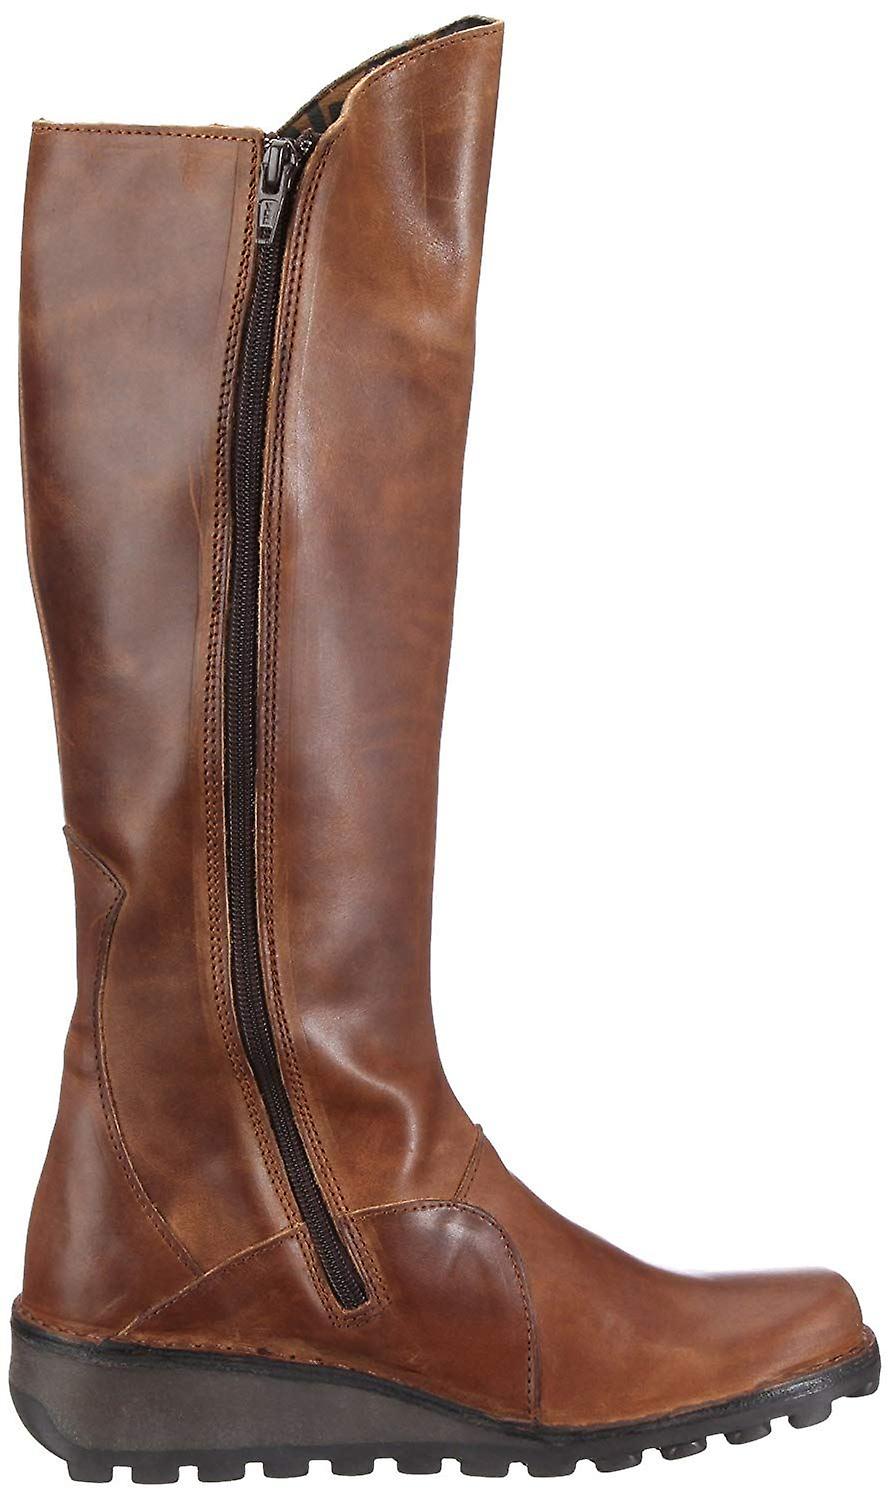 Fly london Mol 2 Camel Leather Womens Knee Hi Boots